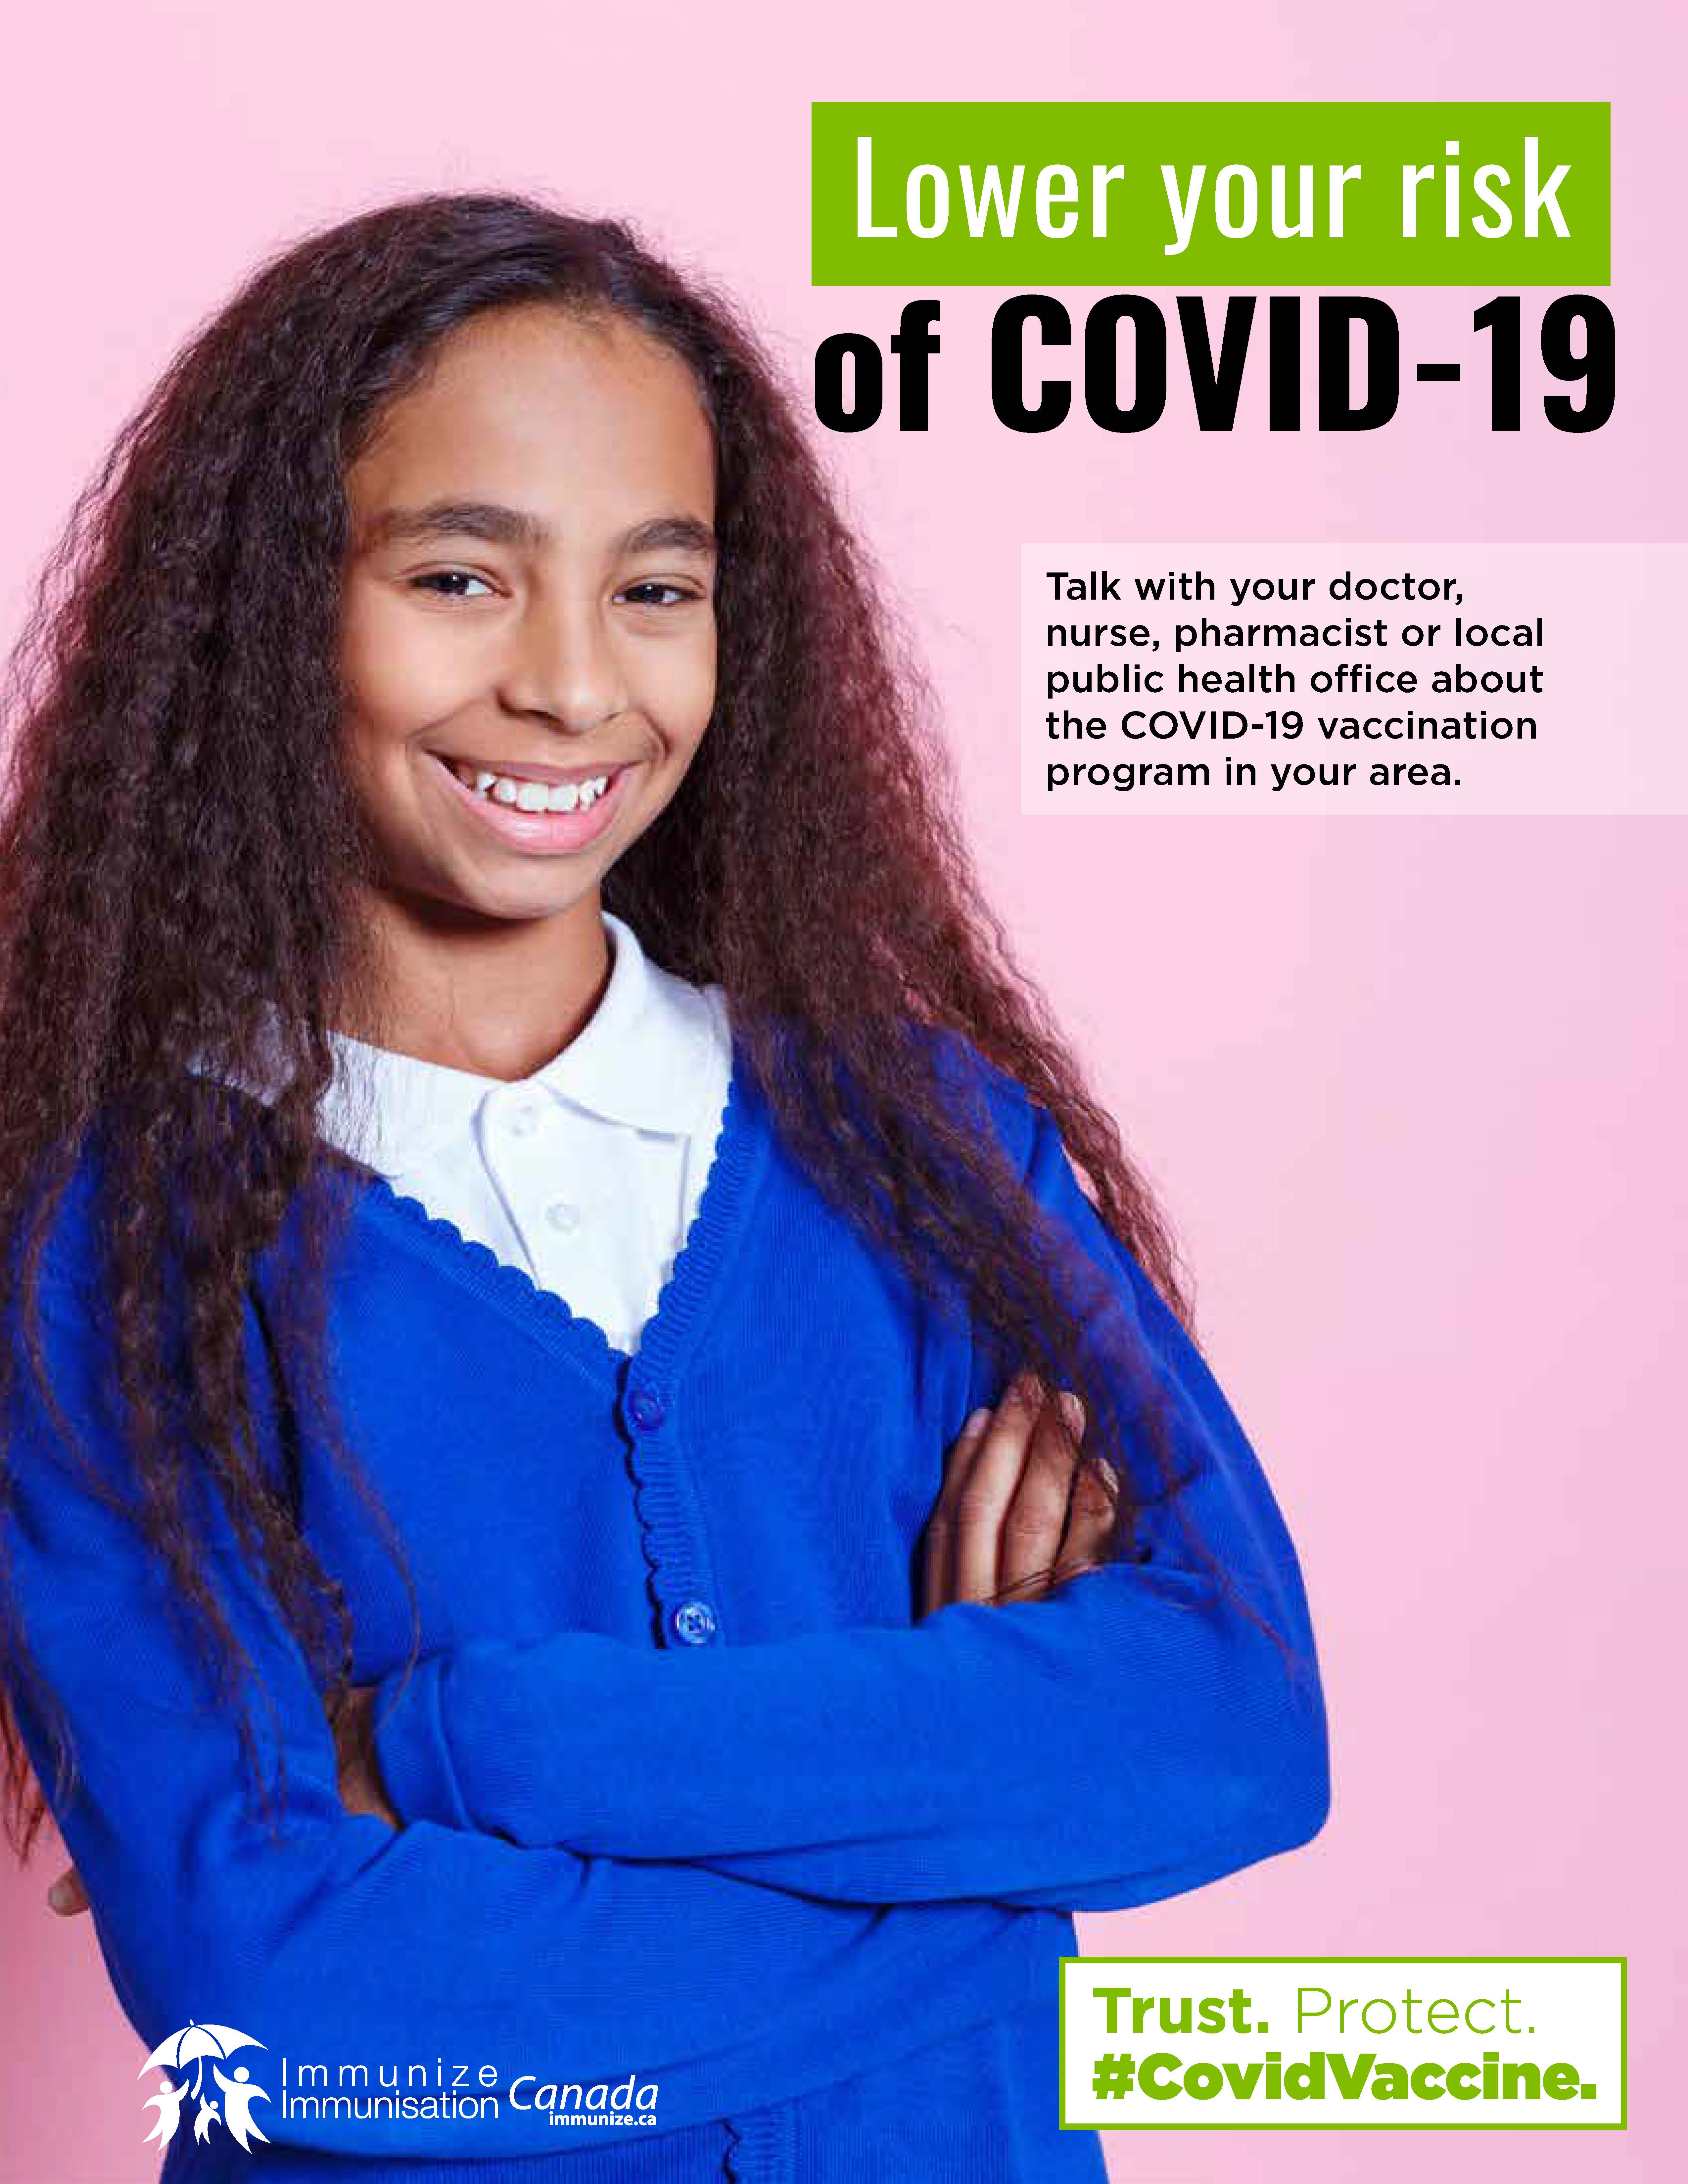 Lower your risk of COVID-19: teens